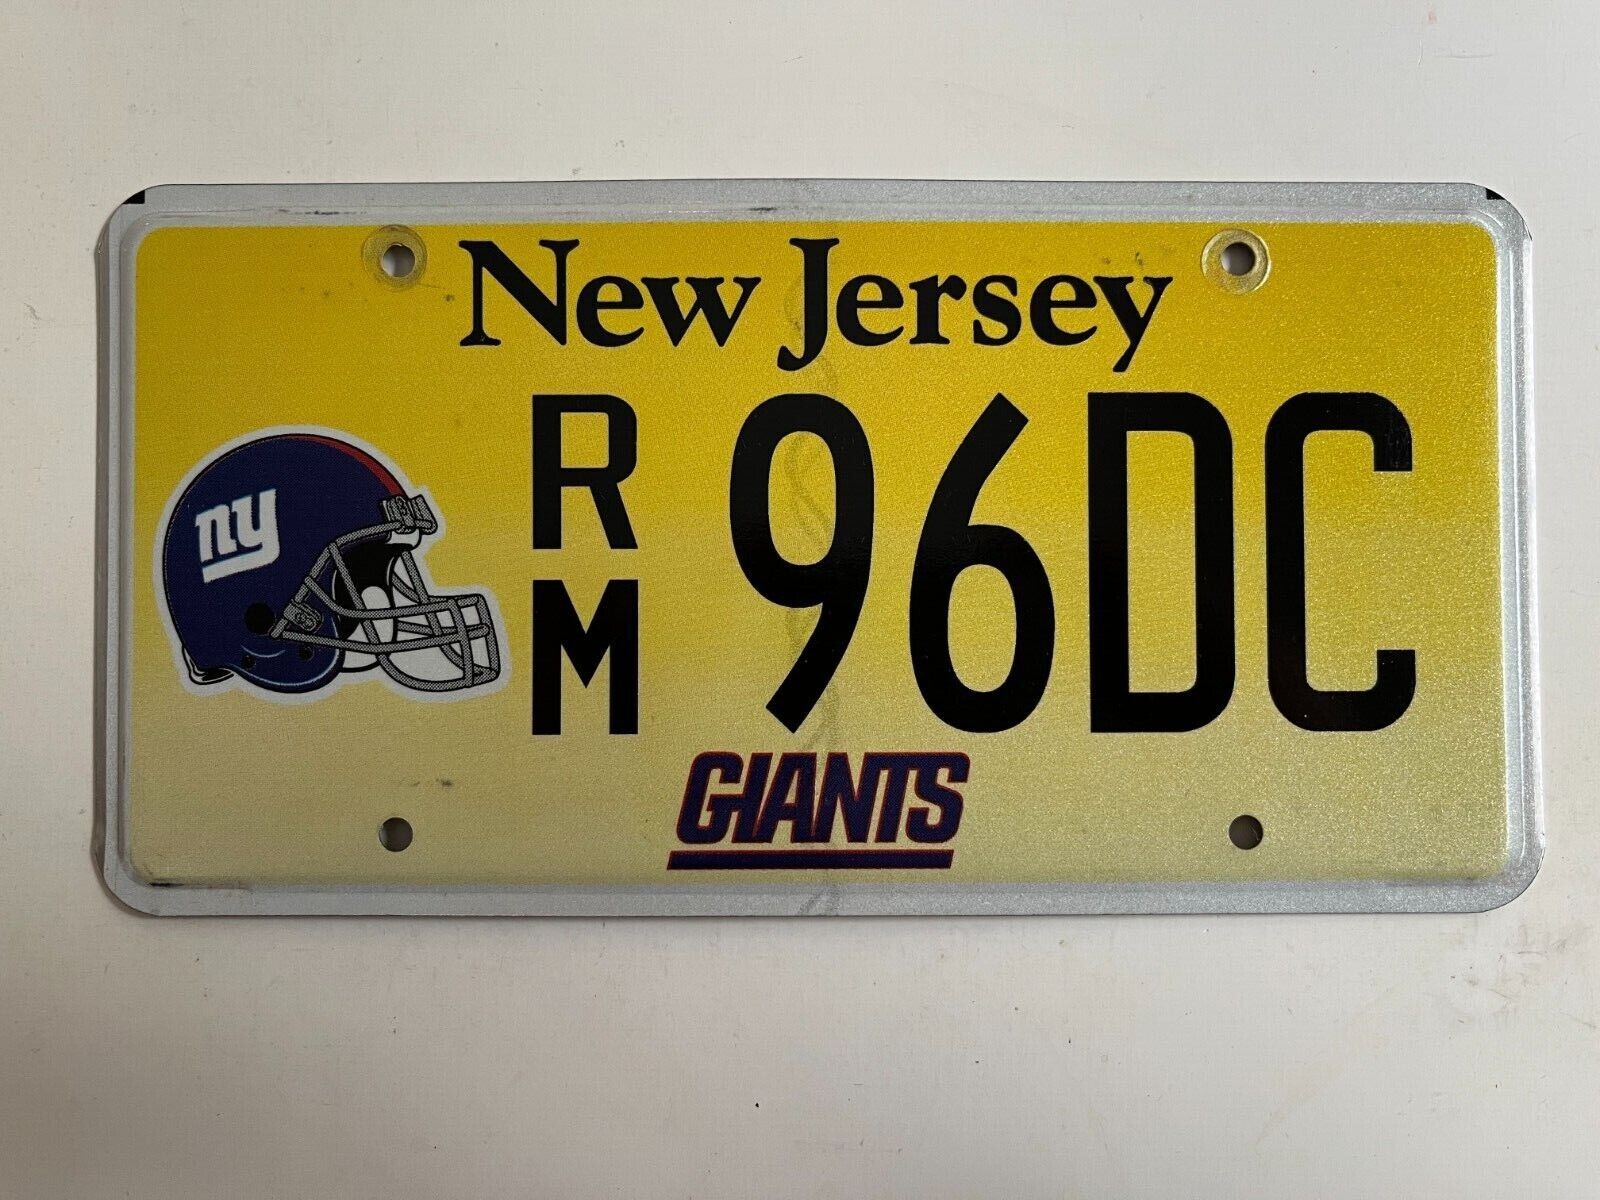 2000s New Jersey License New York Giants Flat Variety of Plate NFL Football